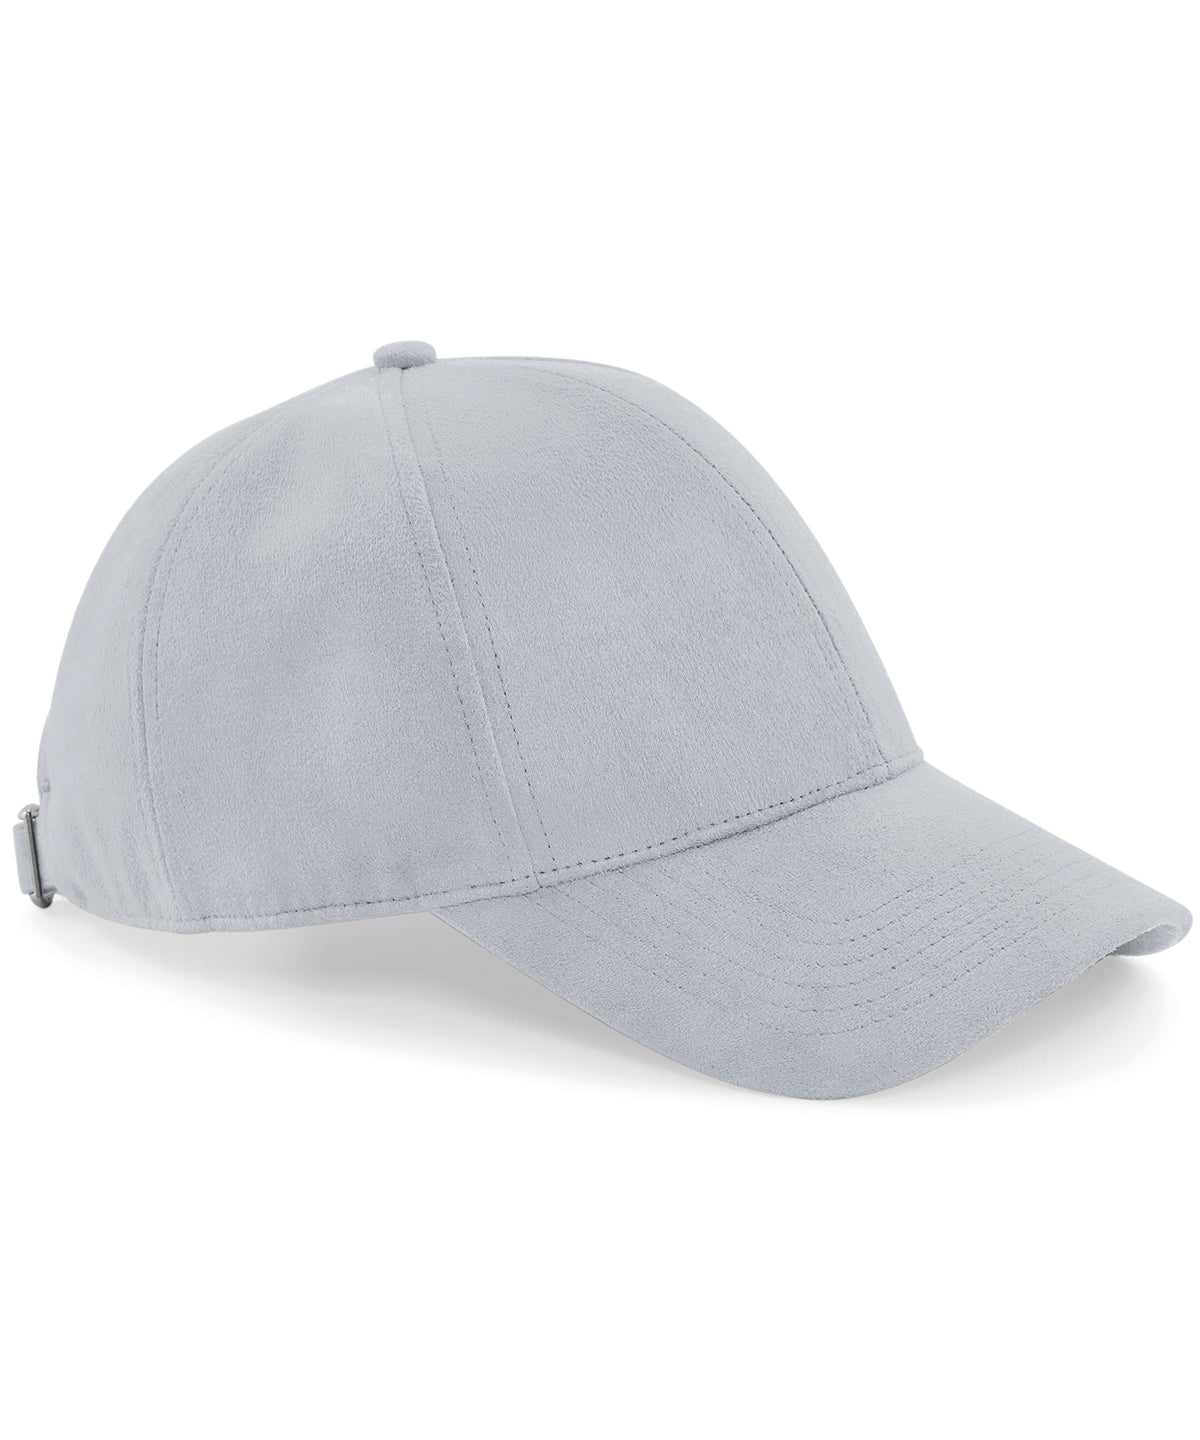 Personalised Caps - Light Grey Beechfield Faux suede 6-panel cap